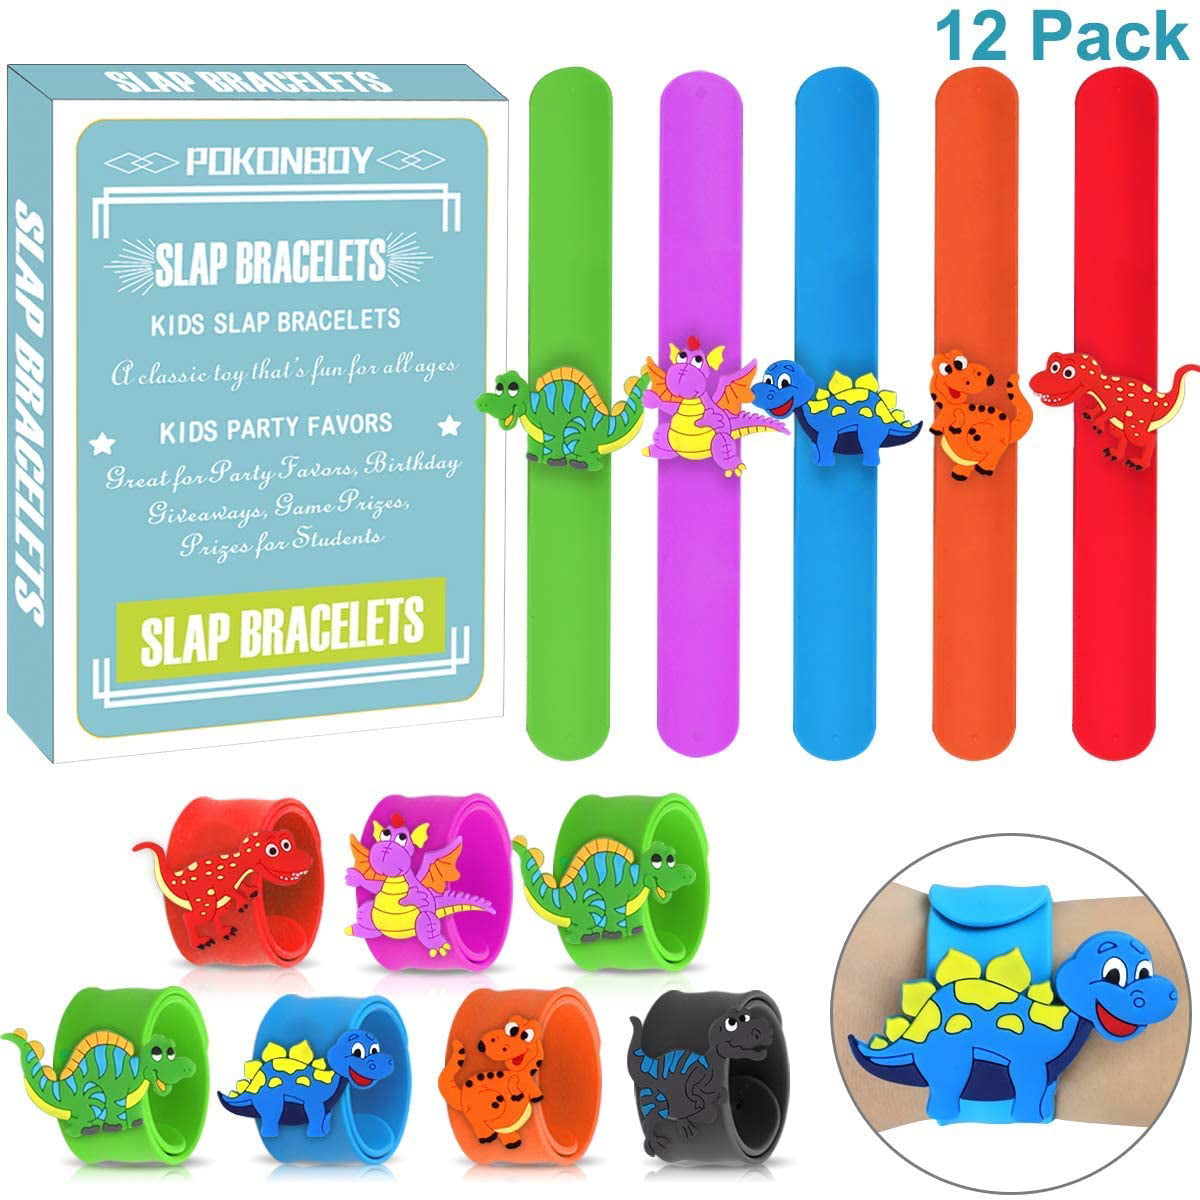 Kids Birthday Party Toy Controller Toy Sunglasses Party Favors for Kids Themed Toys Supplies 12 Count U.S